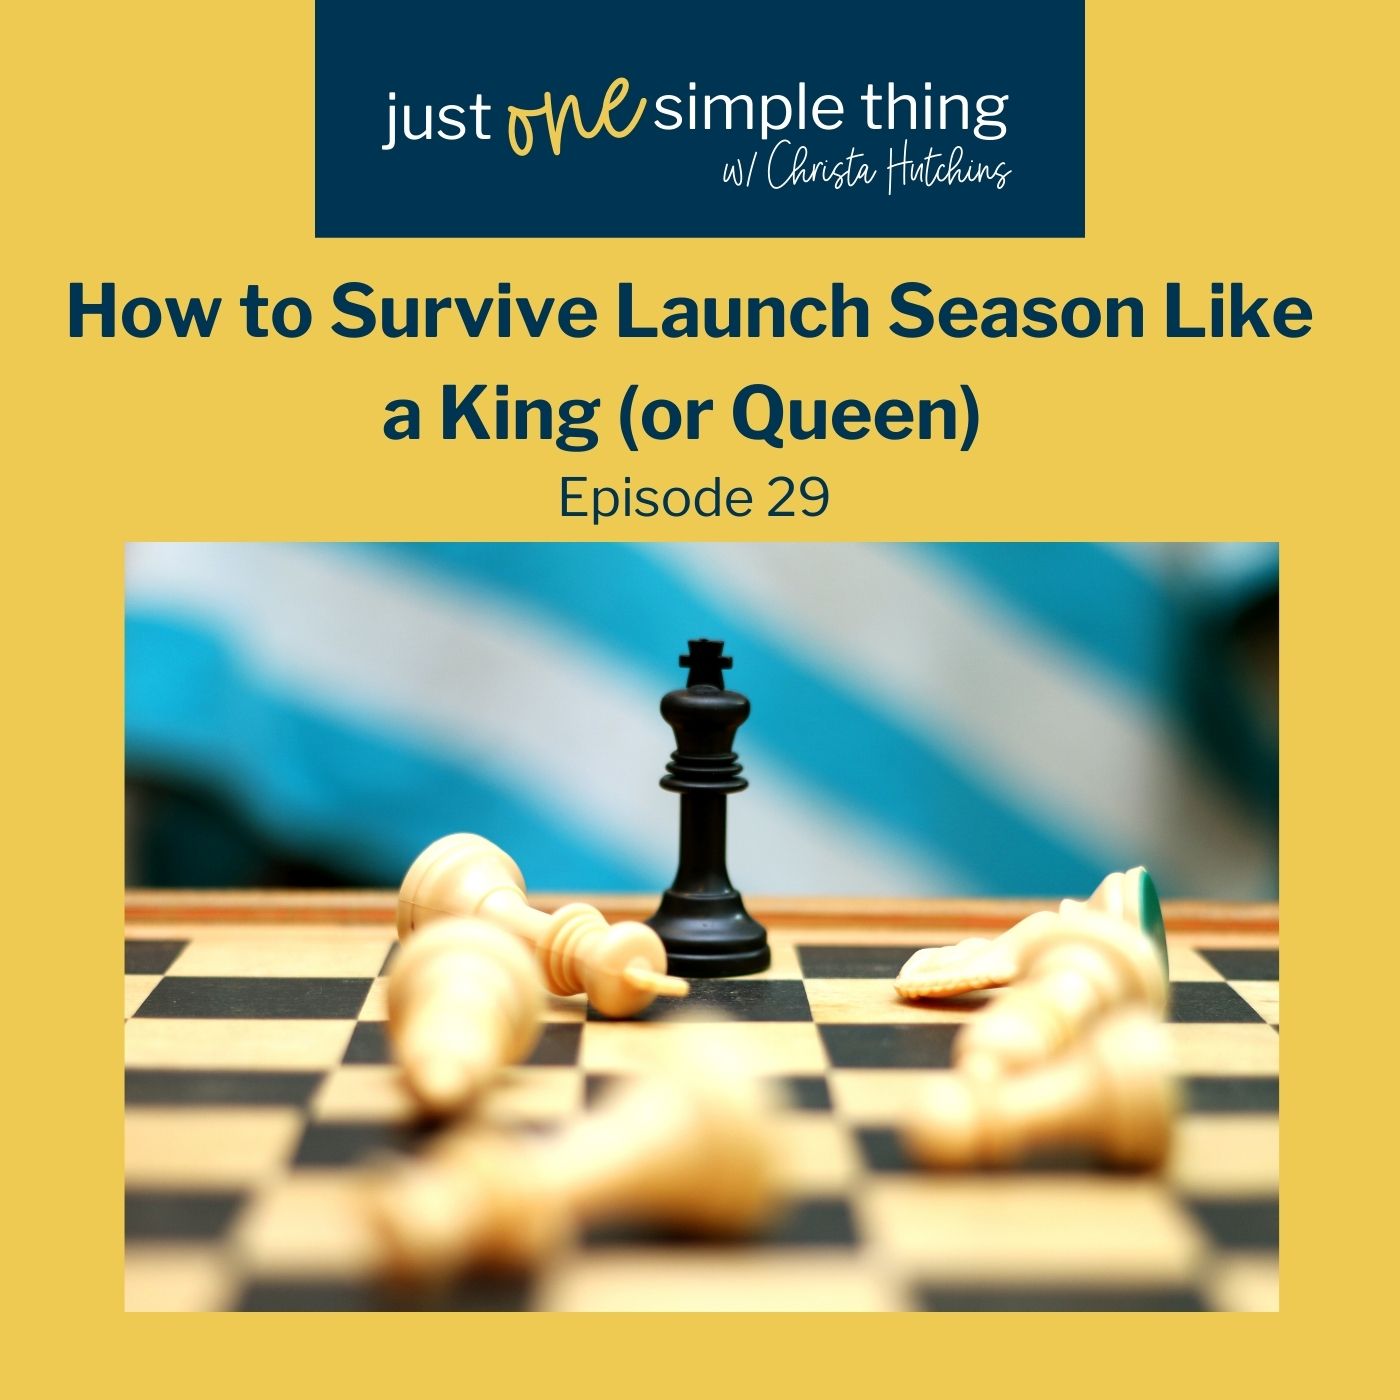 How to Survive Launch Season Like a King (or Queen)